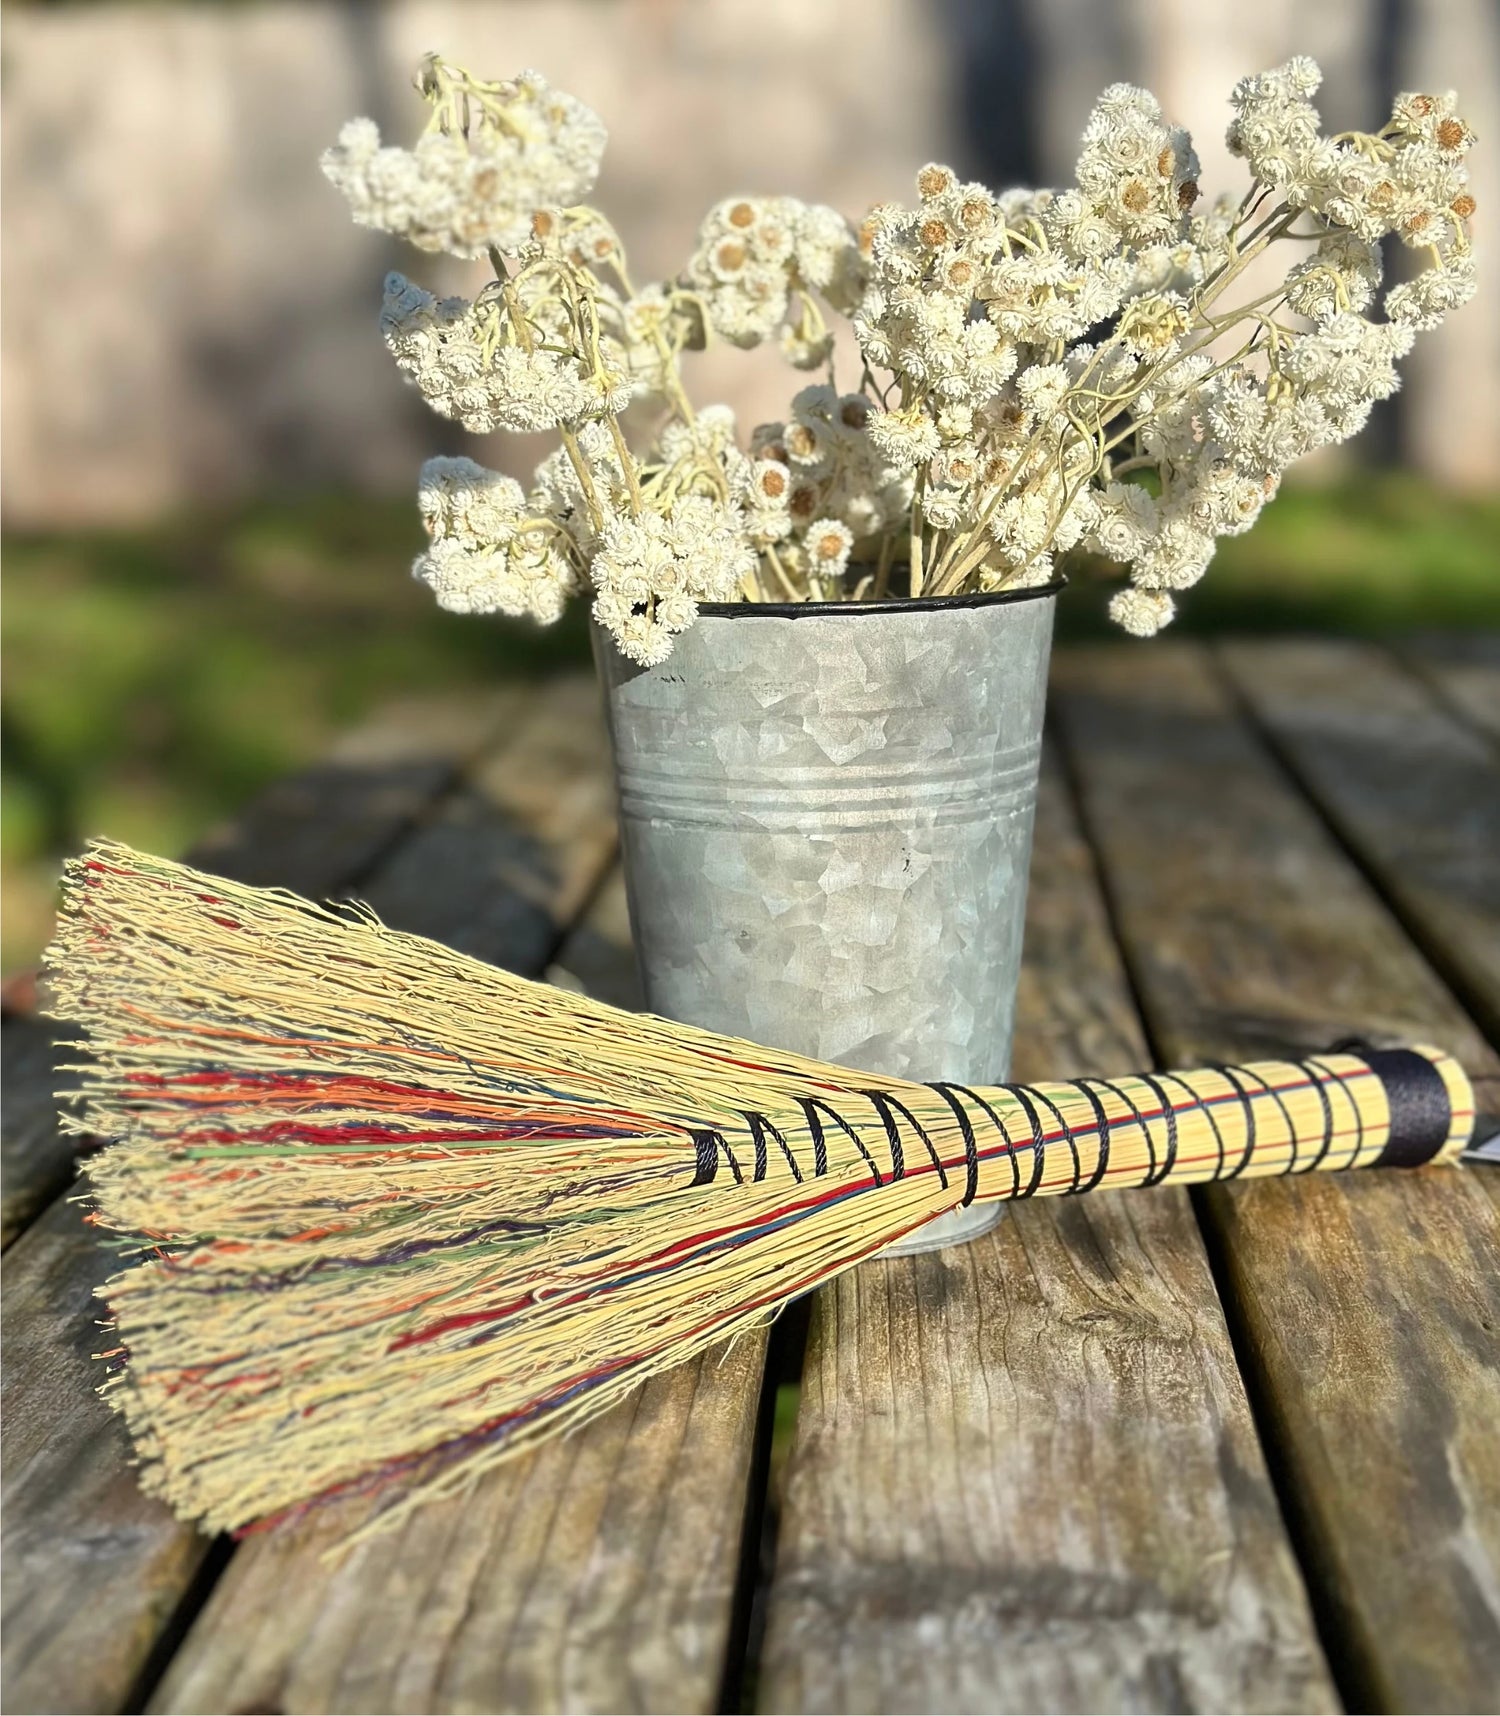 ARTISAN MADE BROOMS AND WHISKS